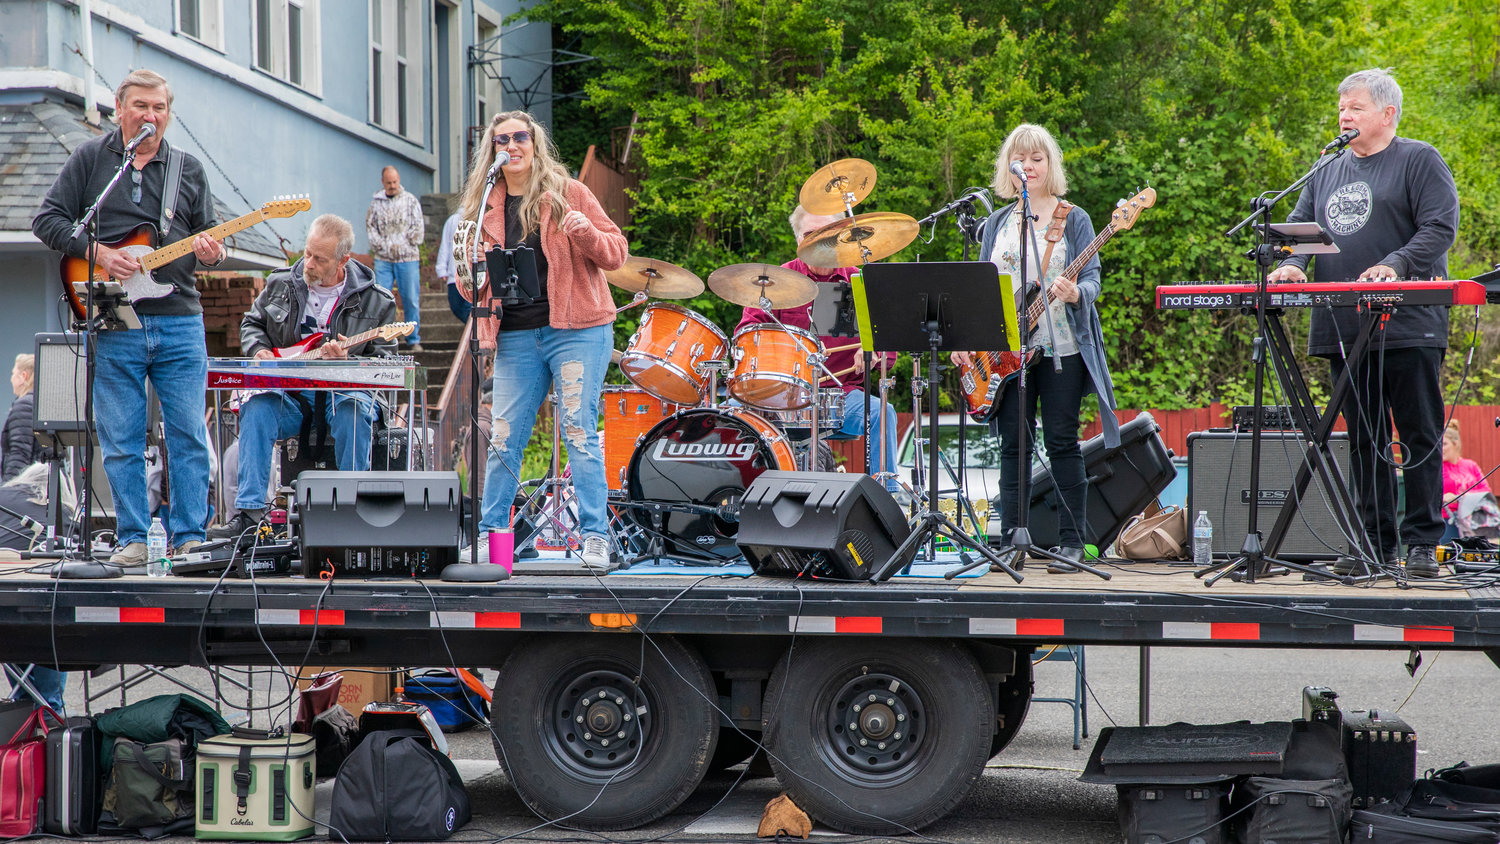 A band plays before the start of the Egg Days Festival parade in Winlock on Saturday.